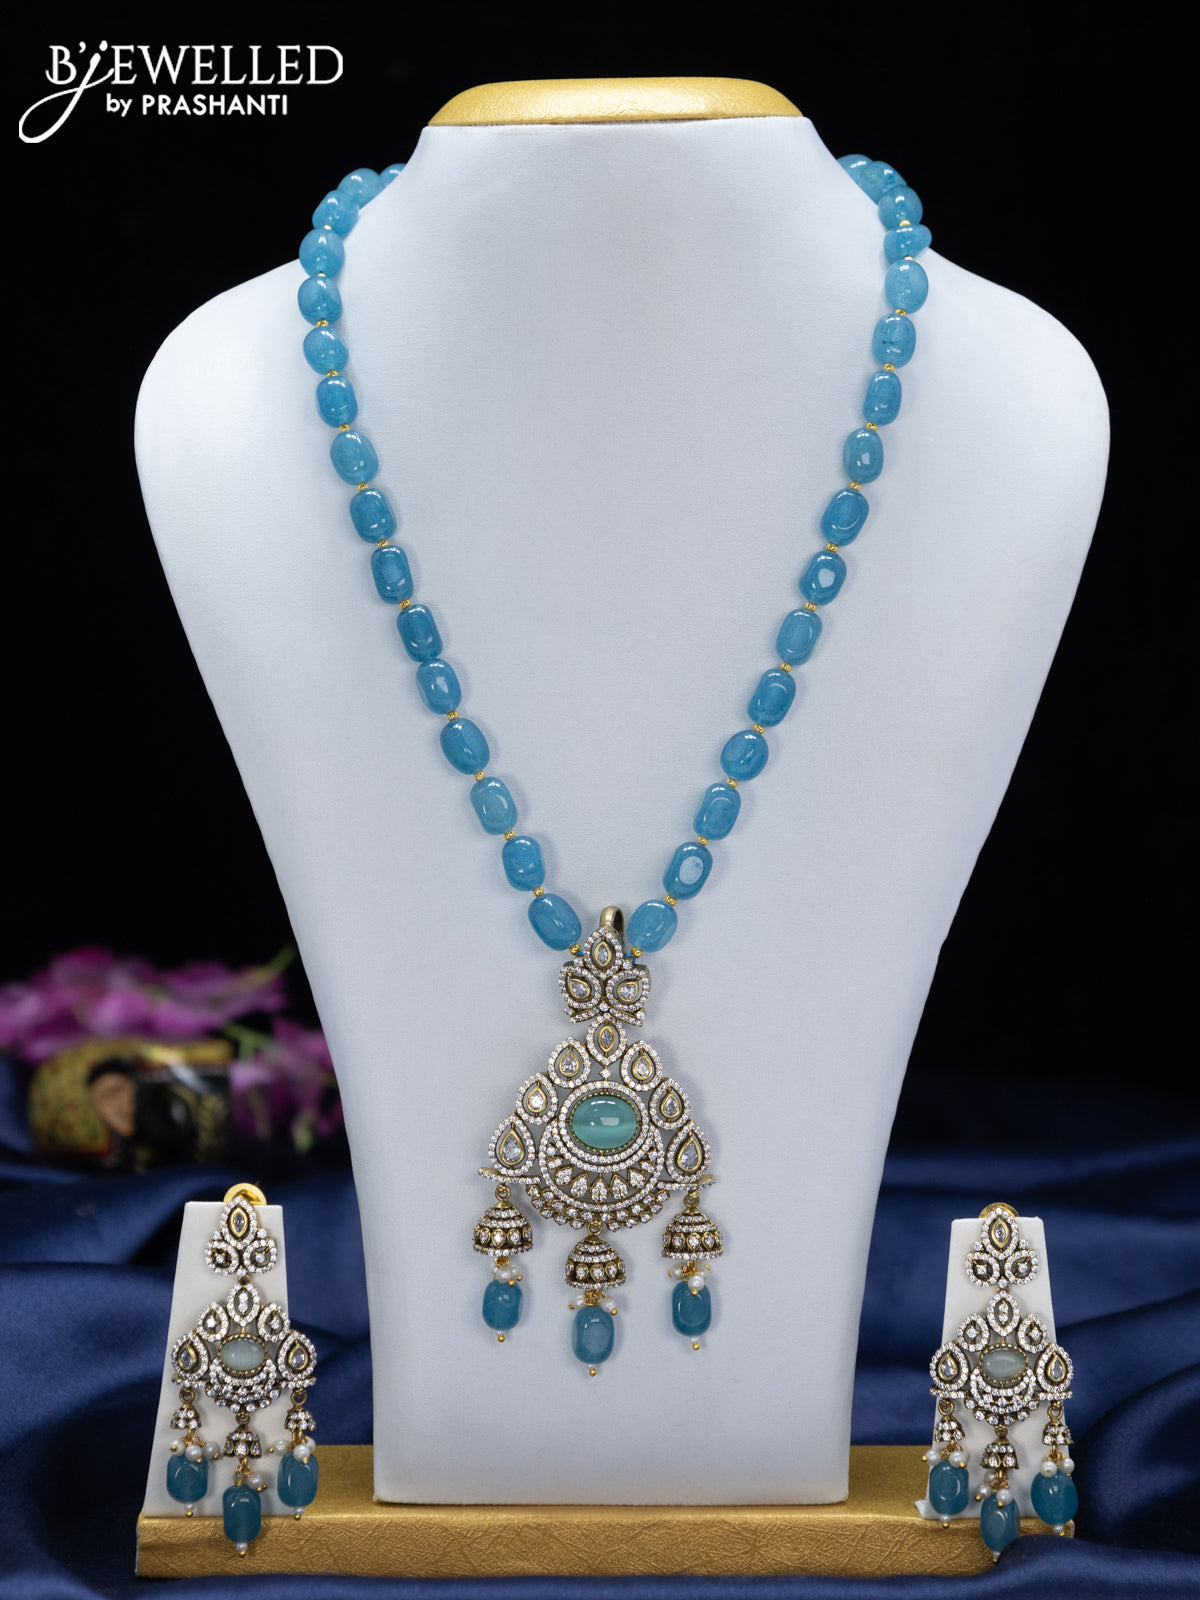 Beaded ice blue necklace with mint green & cz stones and beads hangings in victorian finish